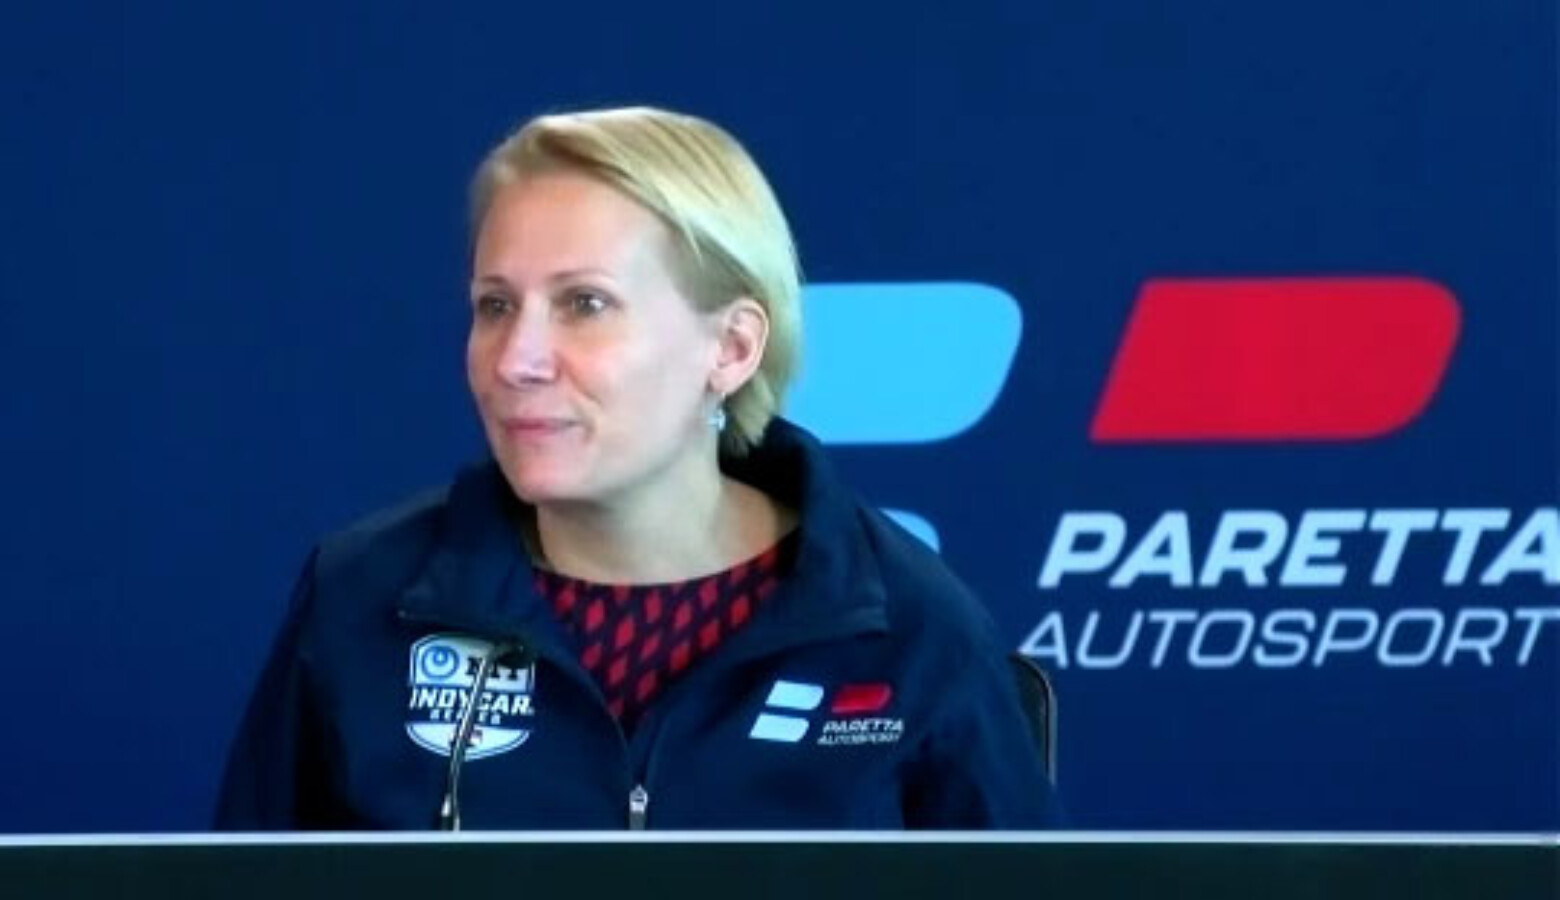 Beth Paretta will be the owner and manager of the new team Paretta Autosport that will work to bring women into all roles of the team. (Screenshot of press conference)